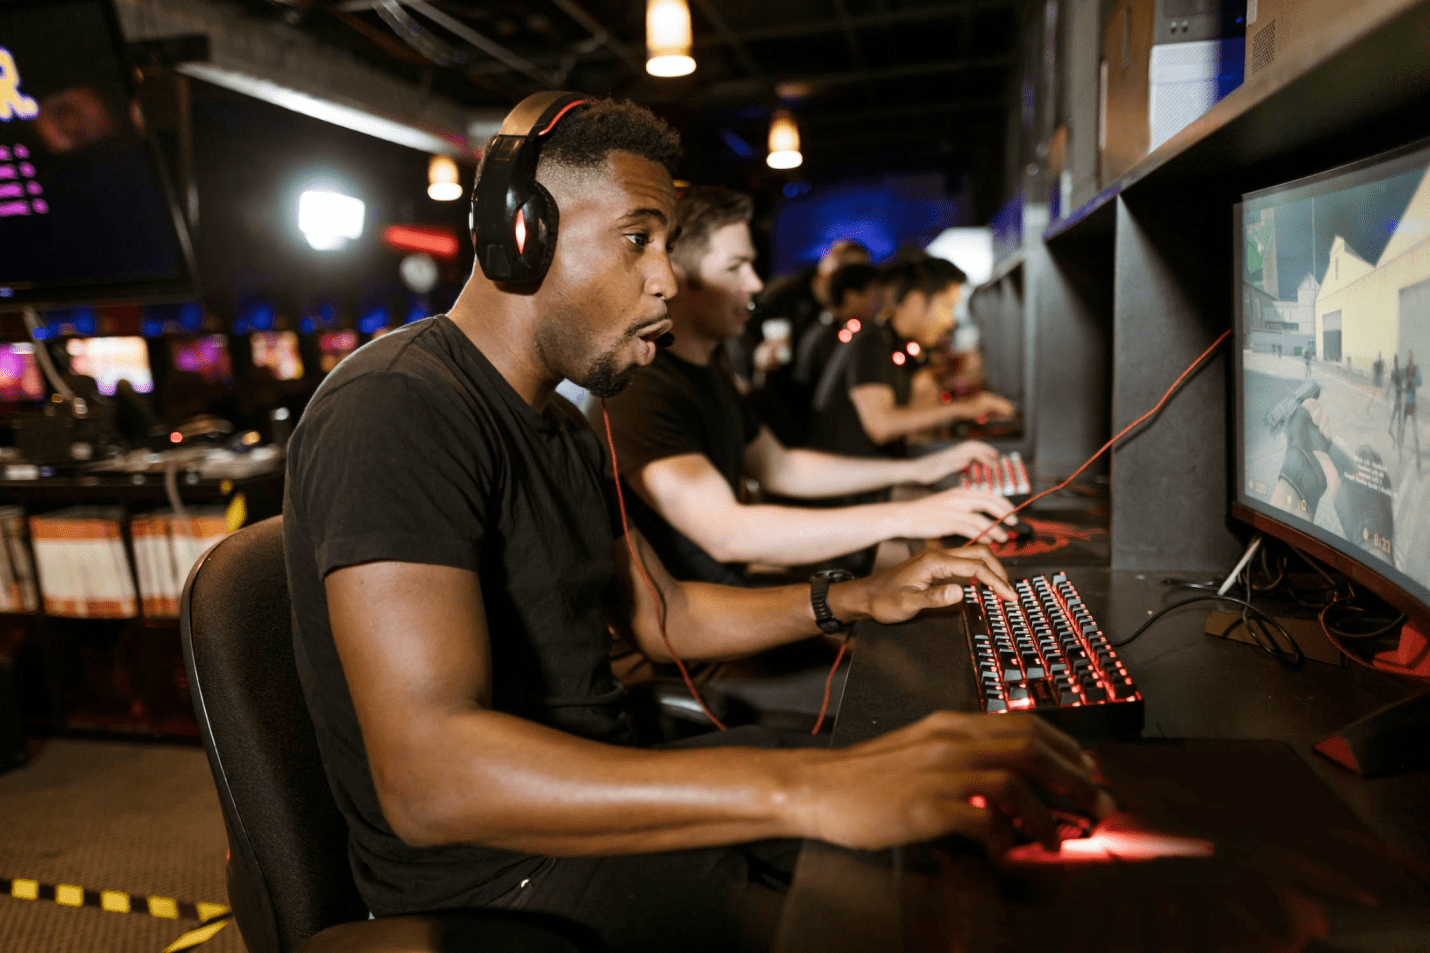 An image of men playing computer games.